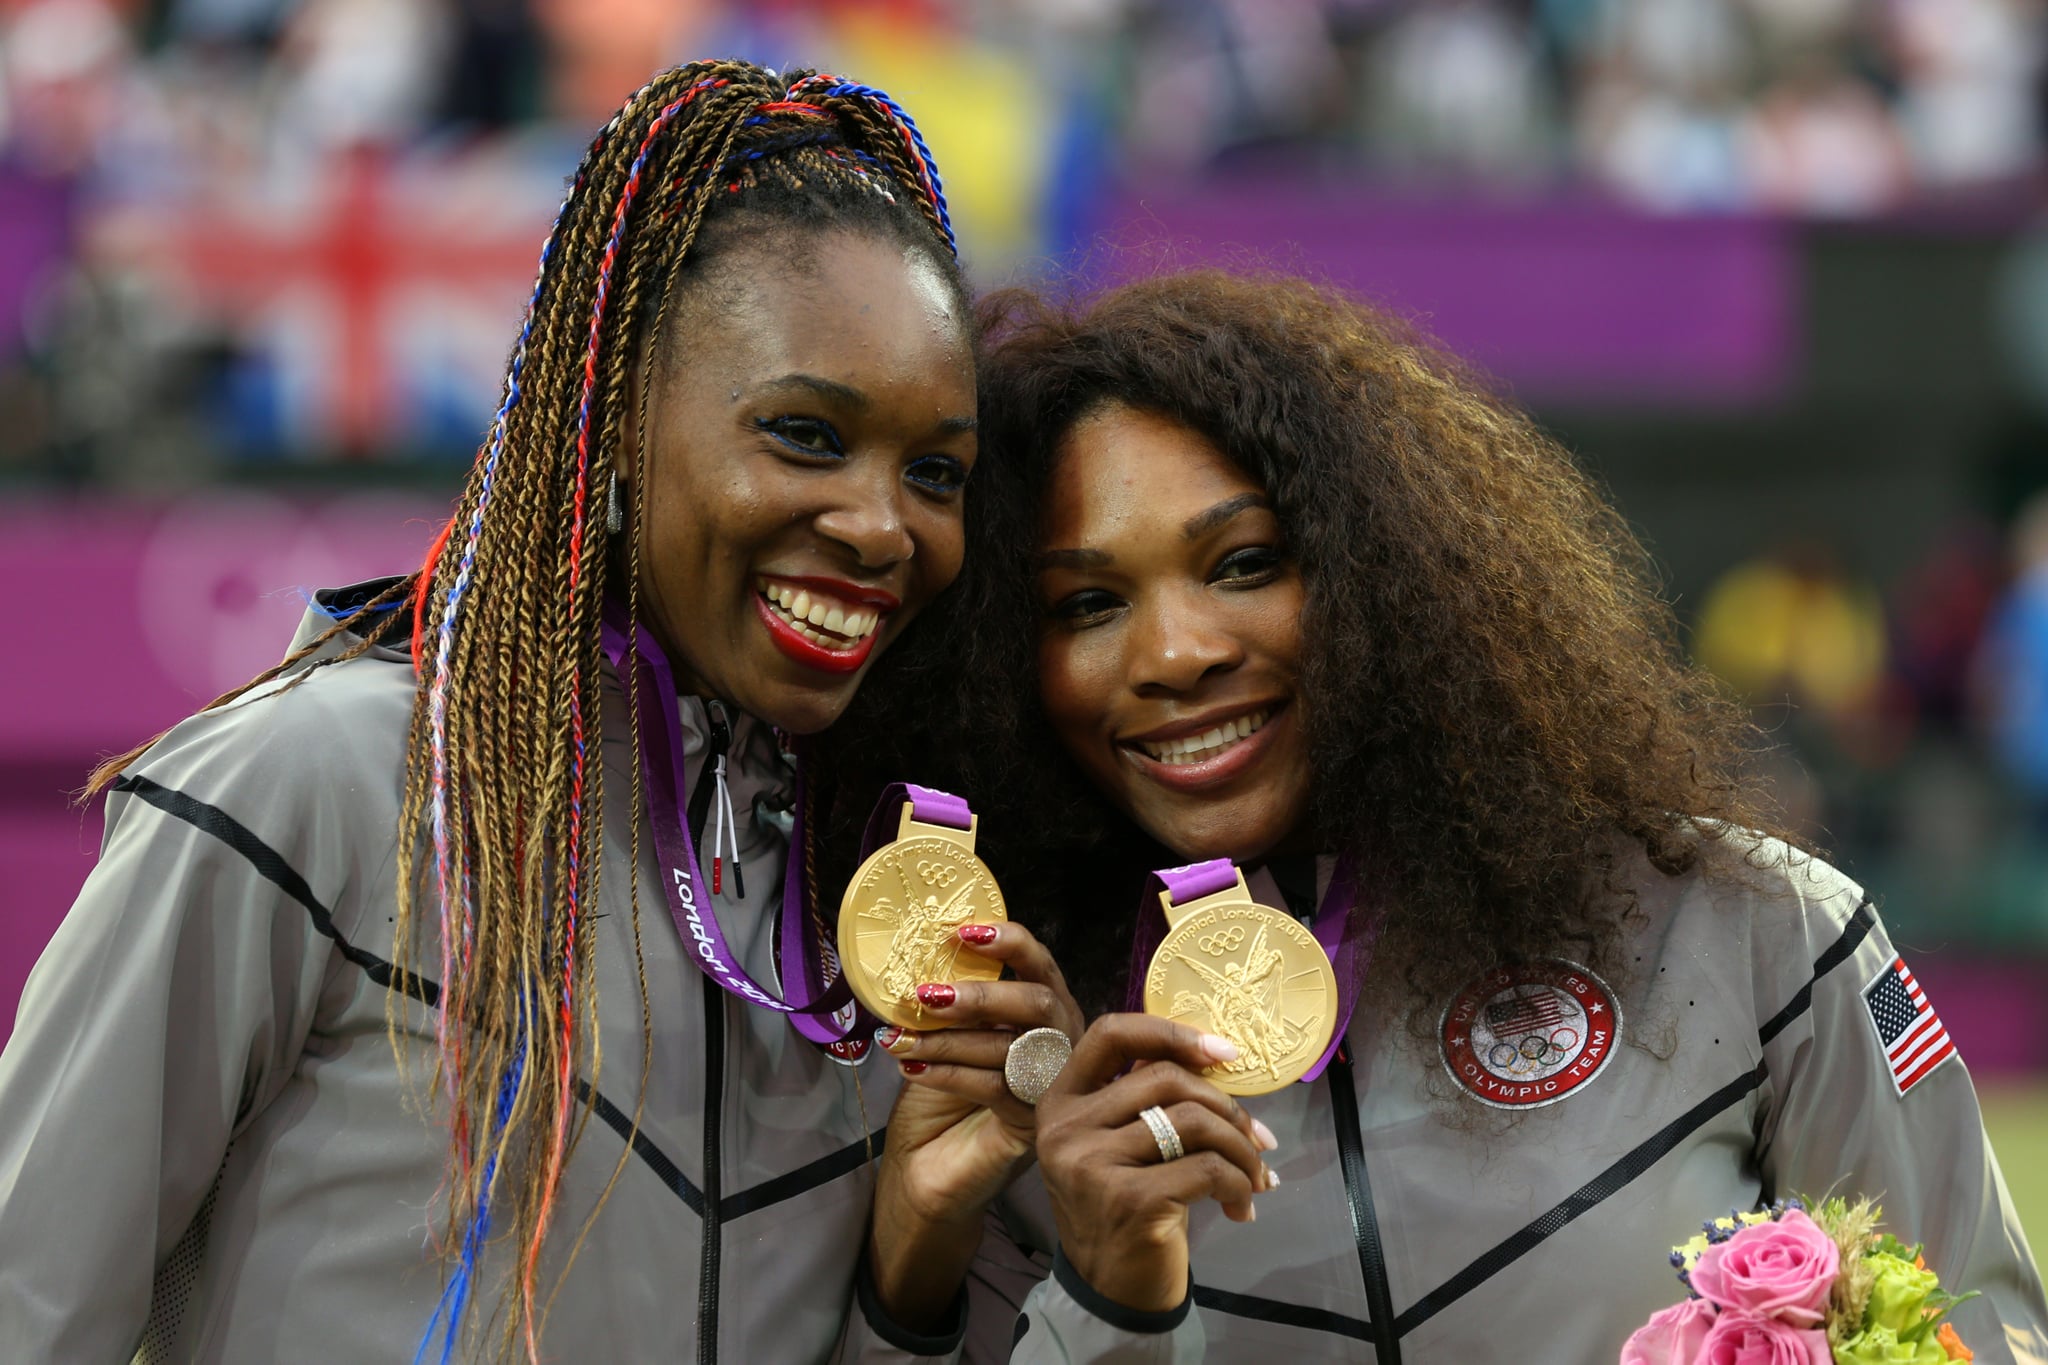 LONDON, ENGLAND - AUGUST 05:  Gold medalists Serena Williams of the United States and Venus Williams of the United States celebrate during the medal ceremony for the Women's Doubles Tennis on Day 9 of the London 2012 Olympic Games at the All England Lawn Tennis and Croquet Club on August 5, 2012 in London, England.  (Photo by Clive Brunskill/Getty Images)